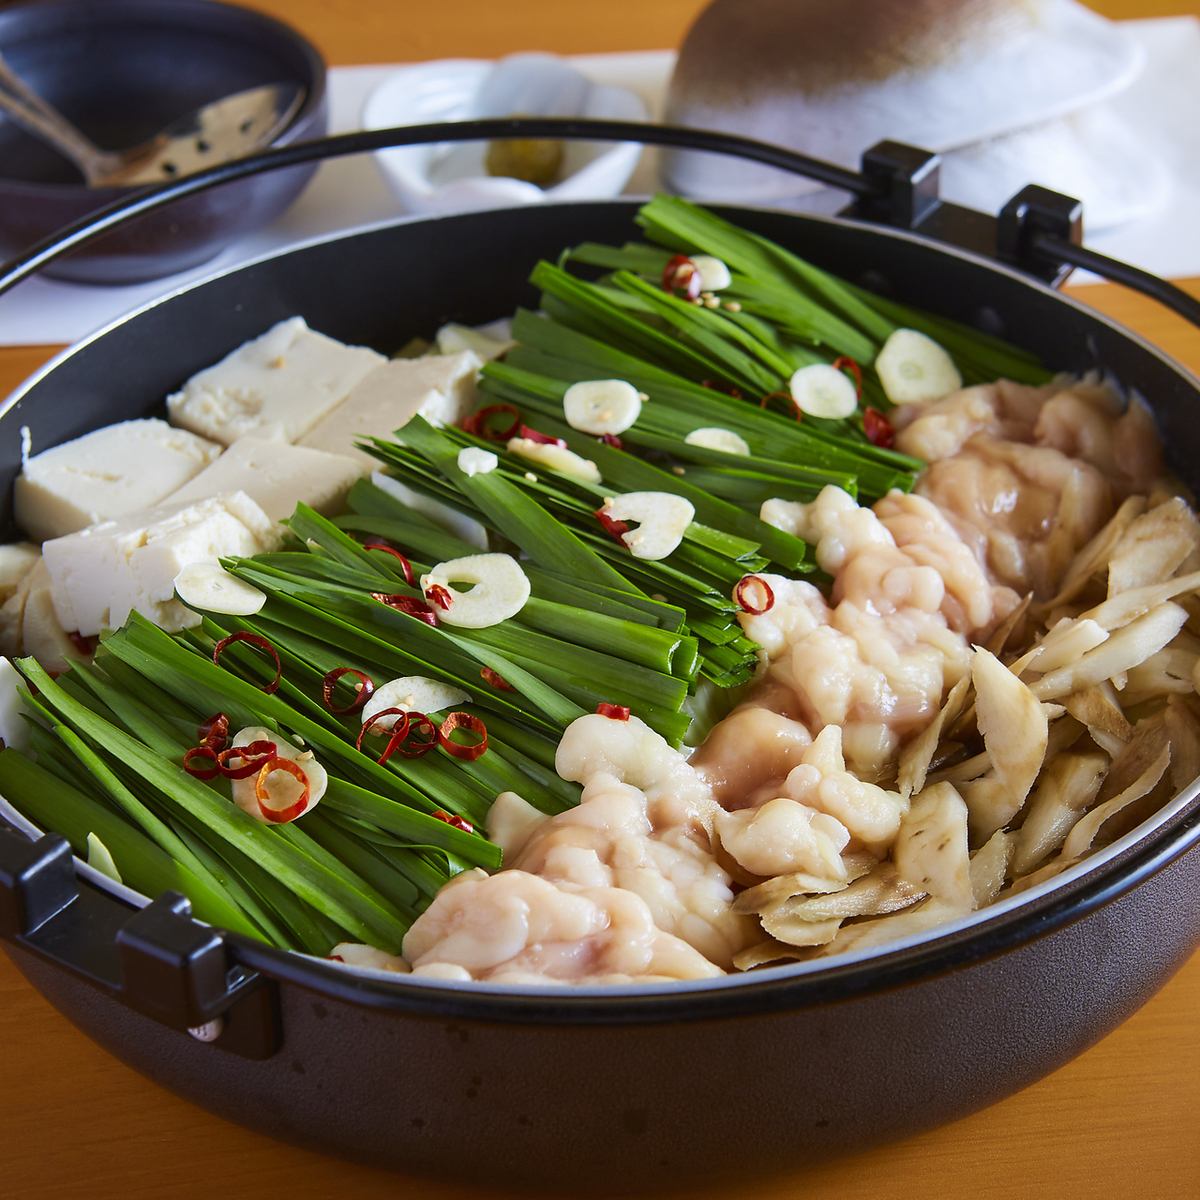 An easy-to-eat soy sauce-based motsu nabe unique to Kyushu, made with umami and deep-bodied chin soup stock.